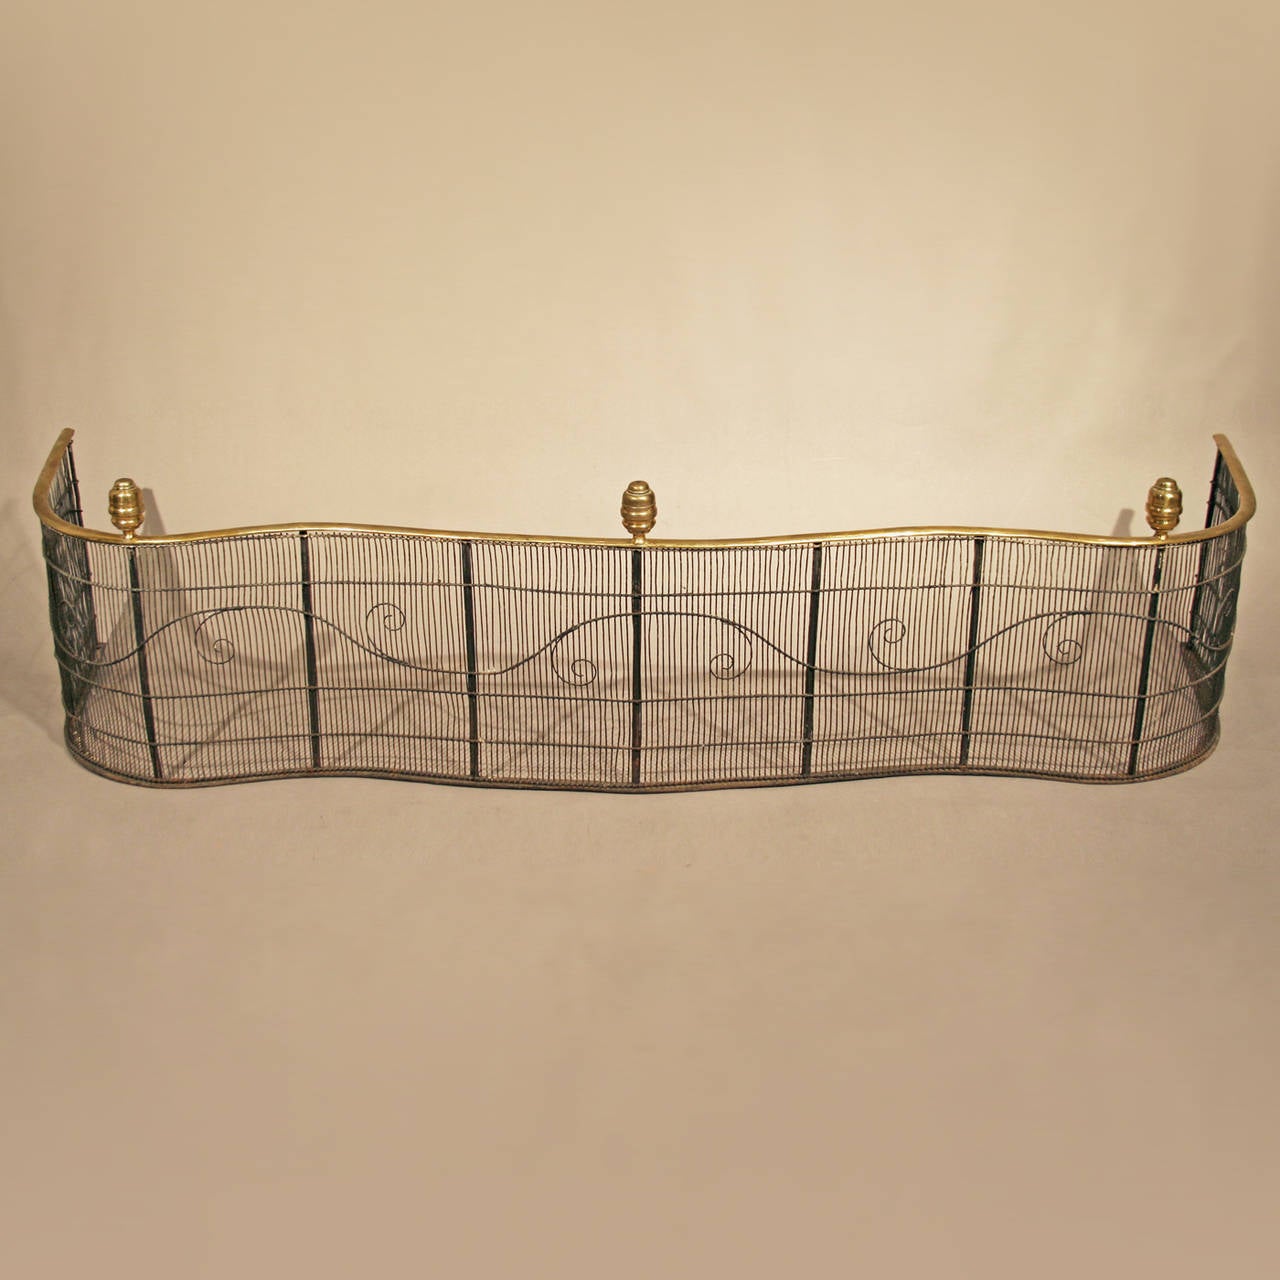 Rare Federal serpentine-front wire-work fender
American, probably Boston, circa 1800-1815.
Brass, square posts, forged iron wire-work.

Early developed Federal period, serpentine-front fenders with turned brass finials are very scarce to find.